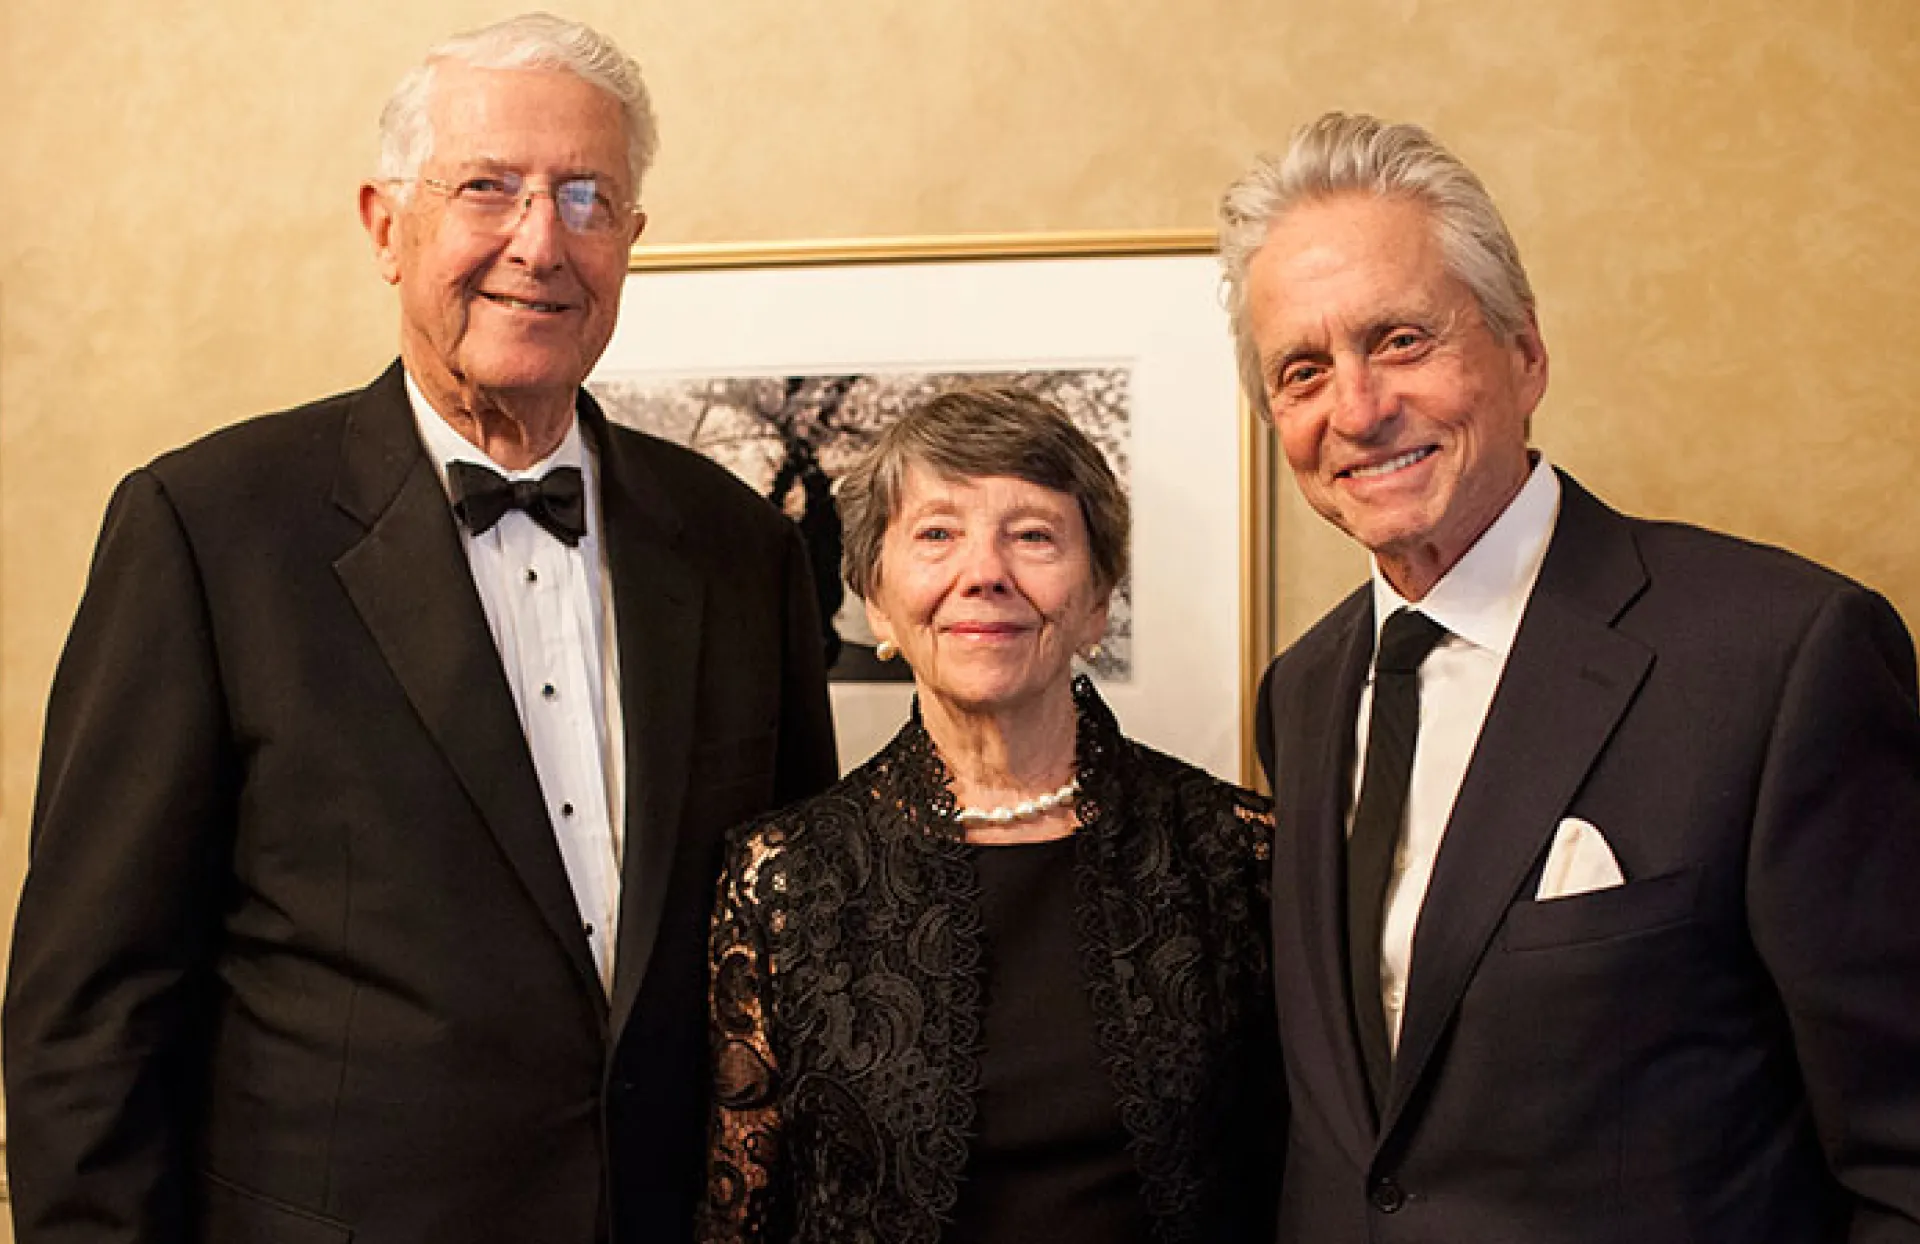 Eastman Museum council members at an event